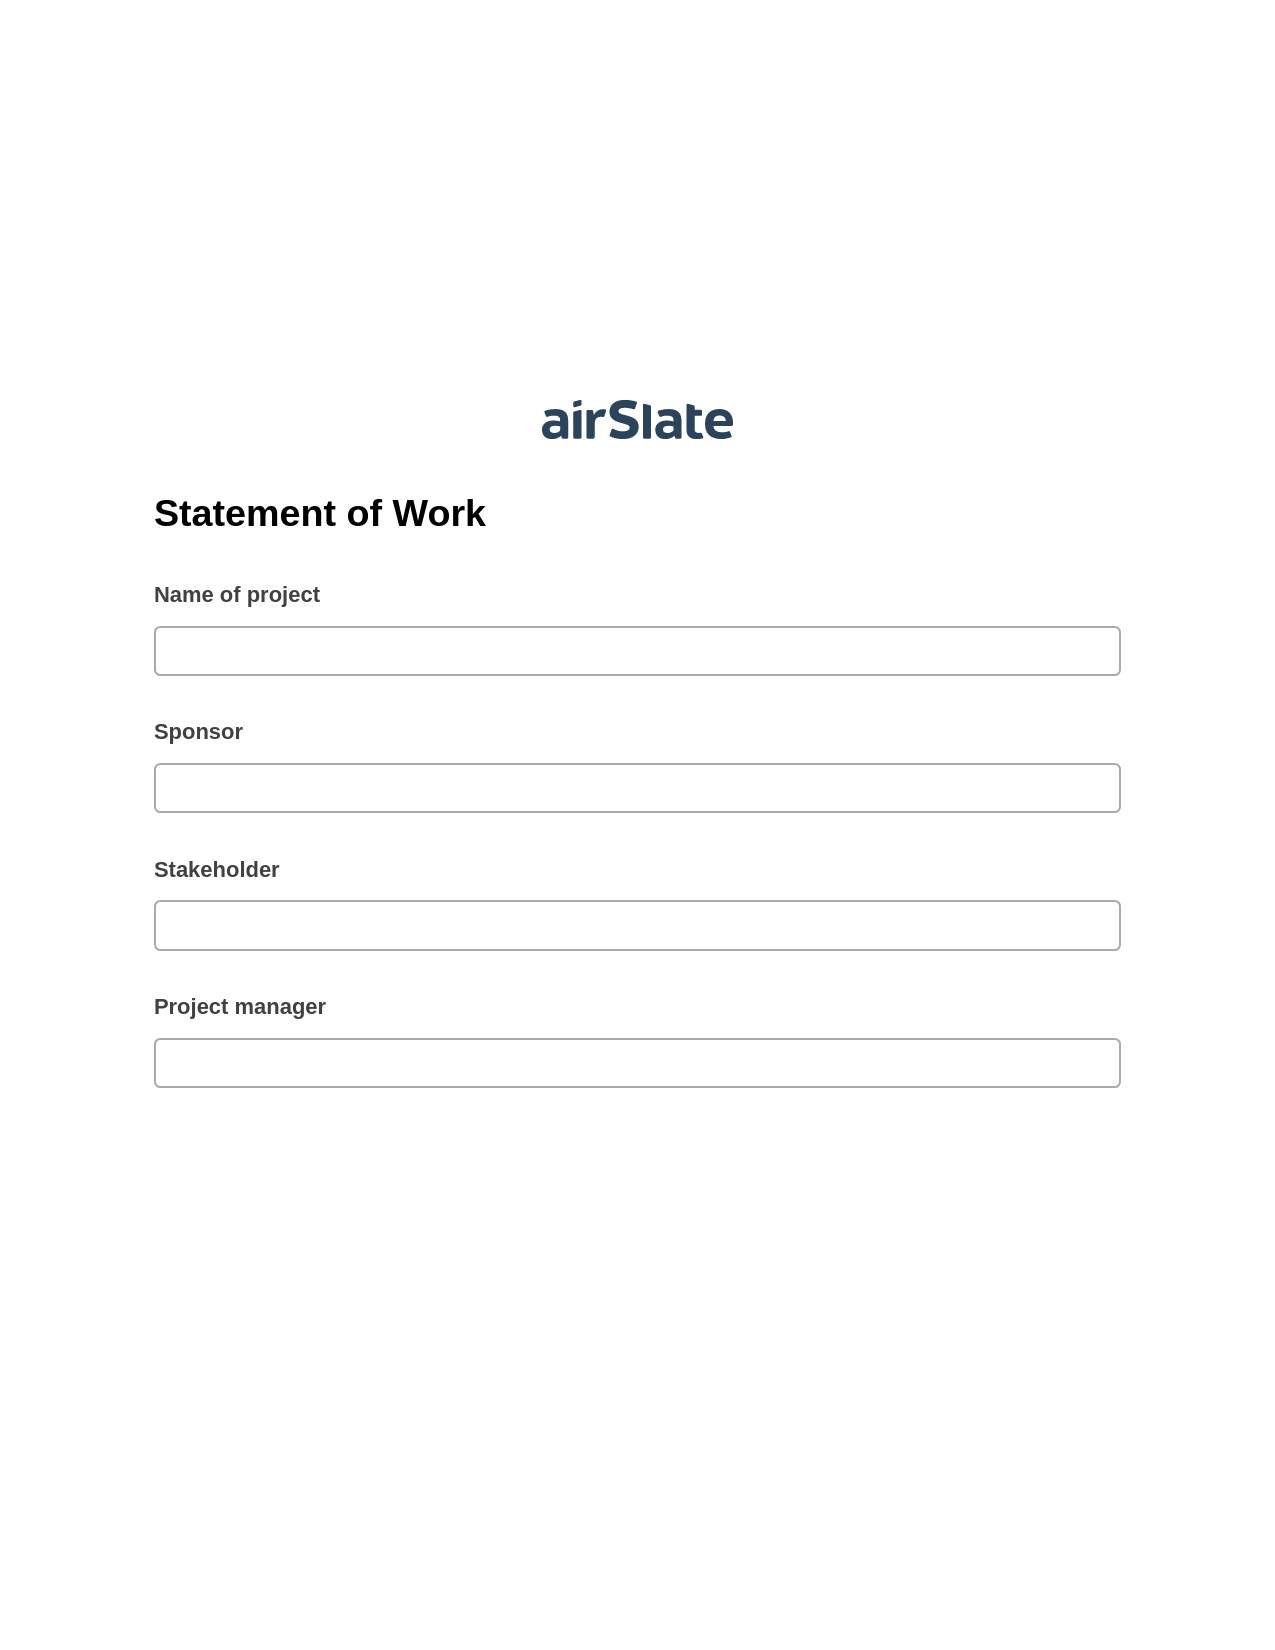 Statement of Work Pre-fill Document Bot, Mailchimp add recipient to audience Bot, Archive to SharePoint Folder Bot